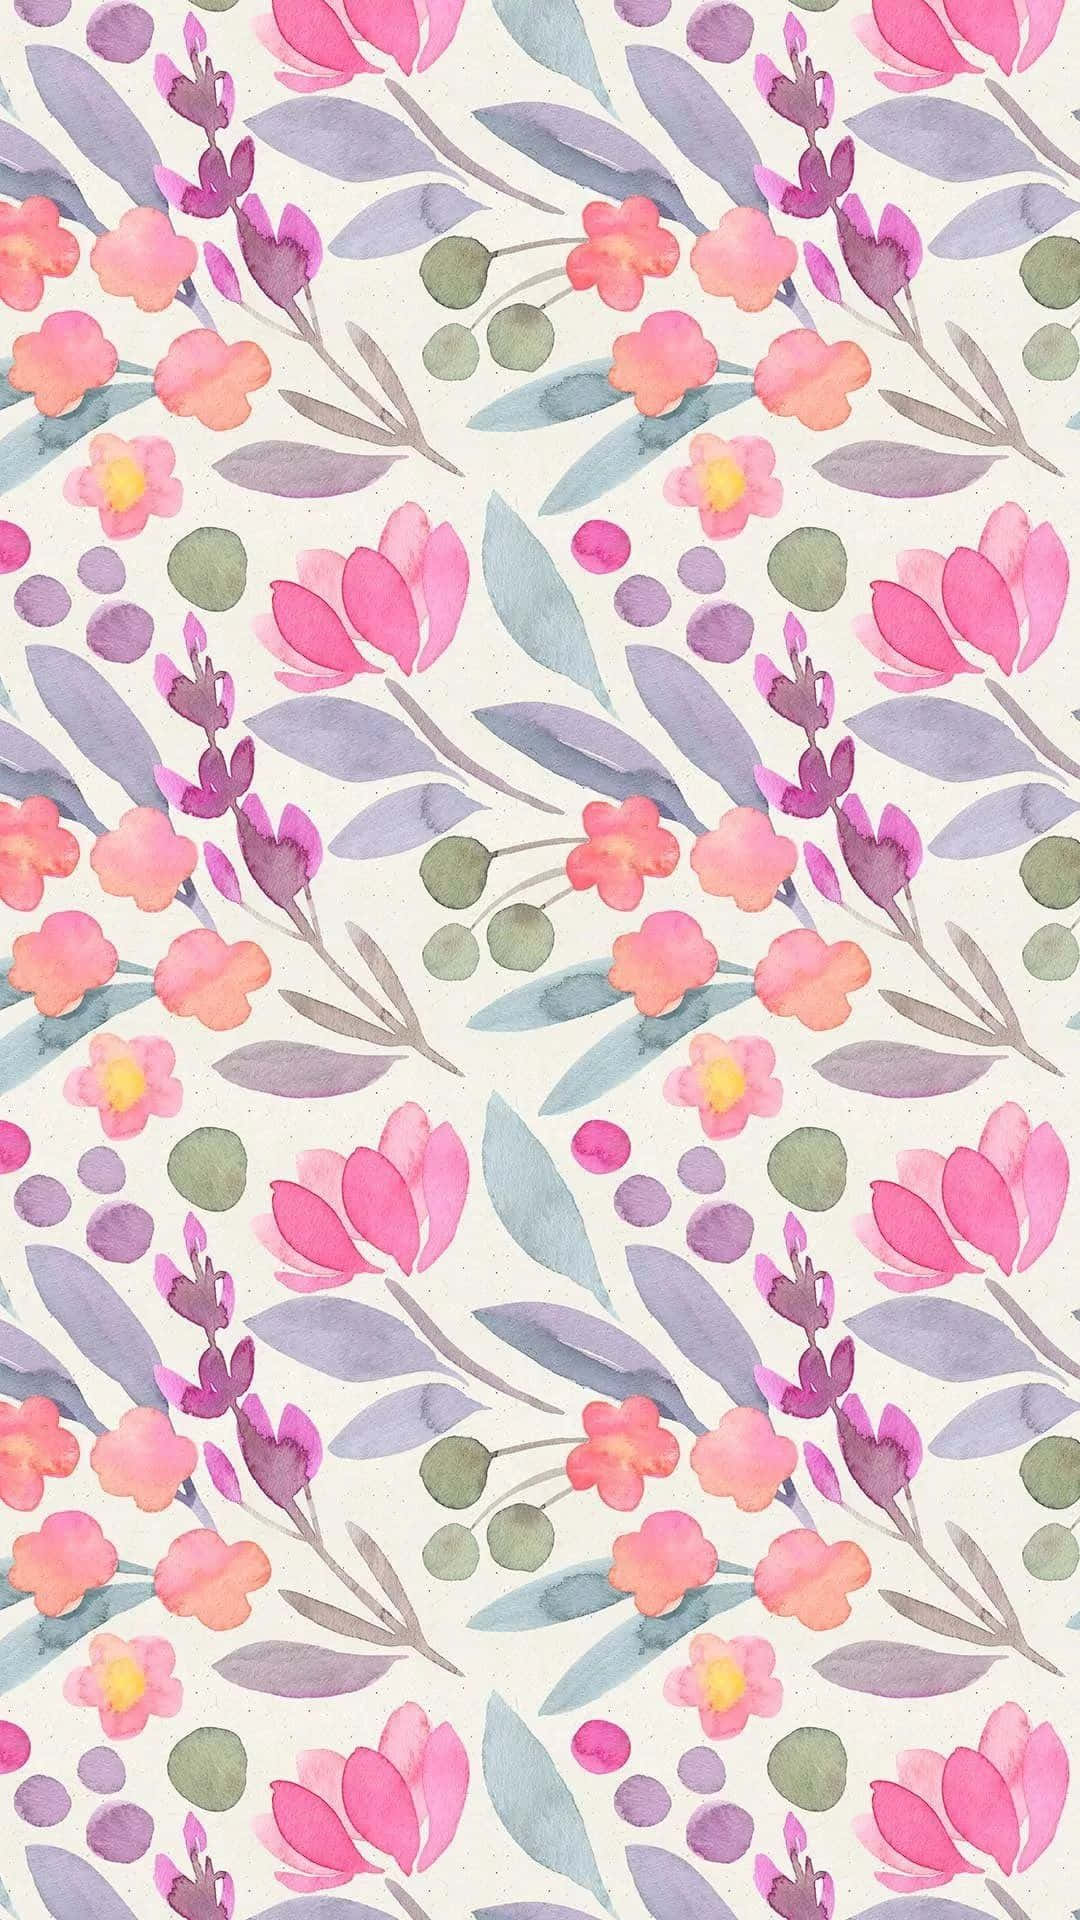 Lillypulitzer Iphone Pastel Flowers Can Be Translated To 